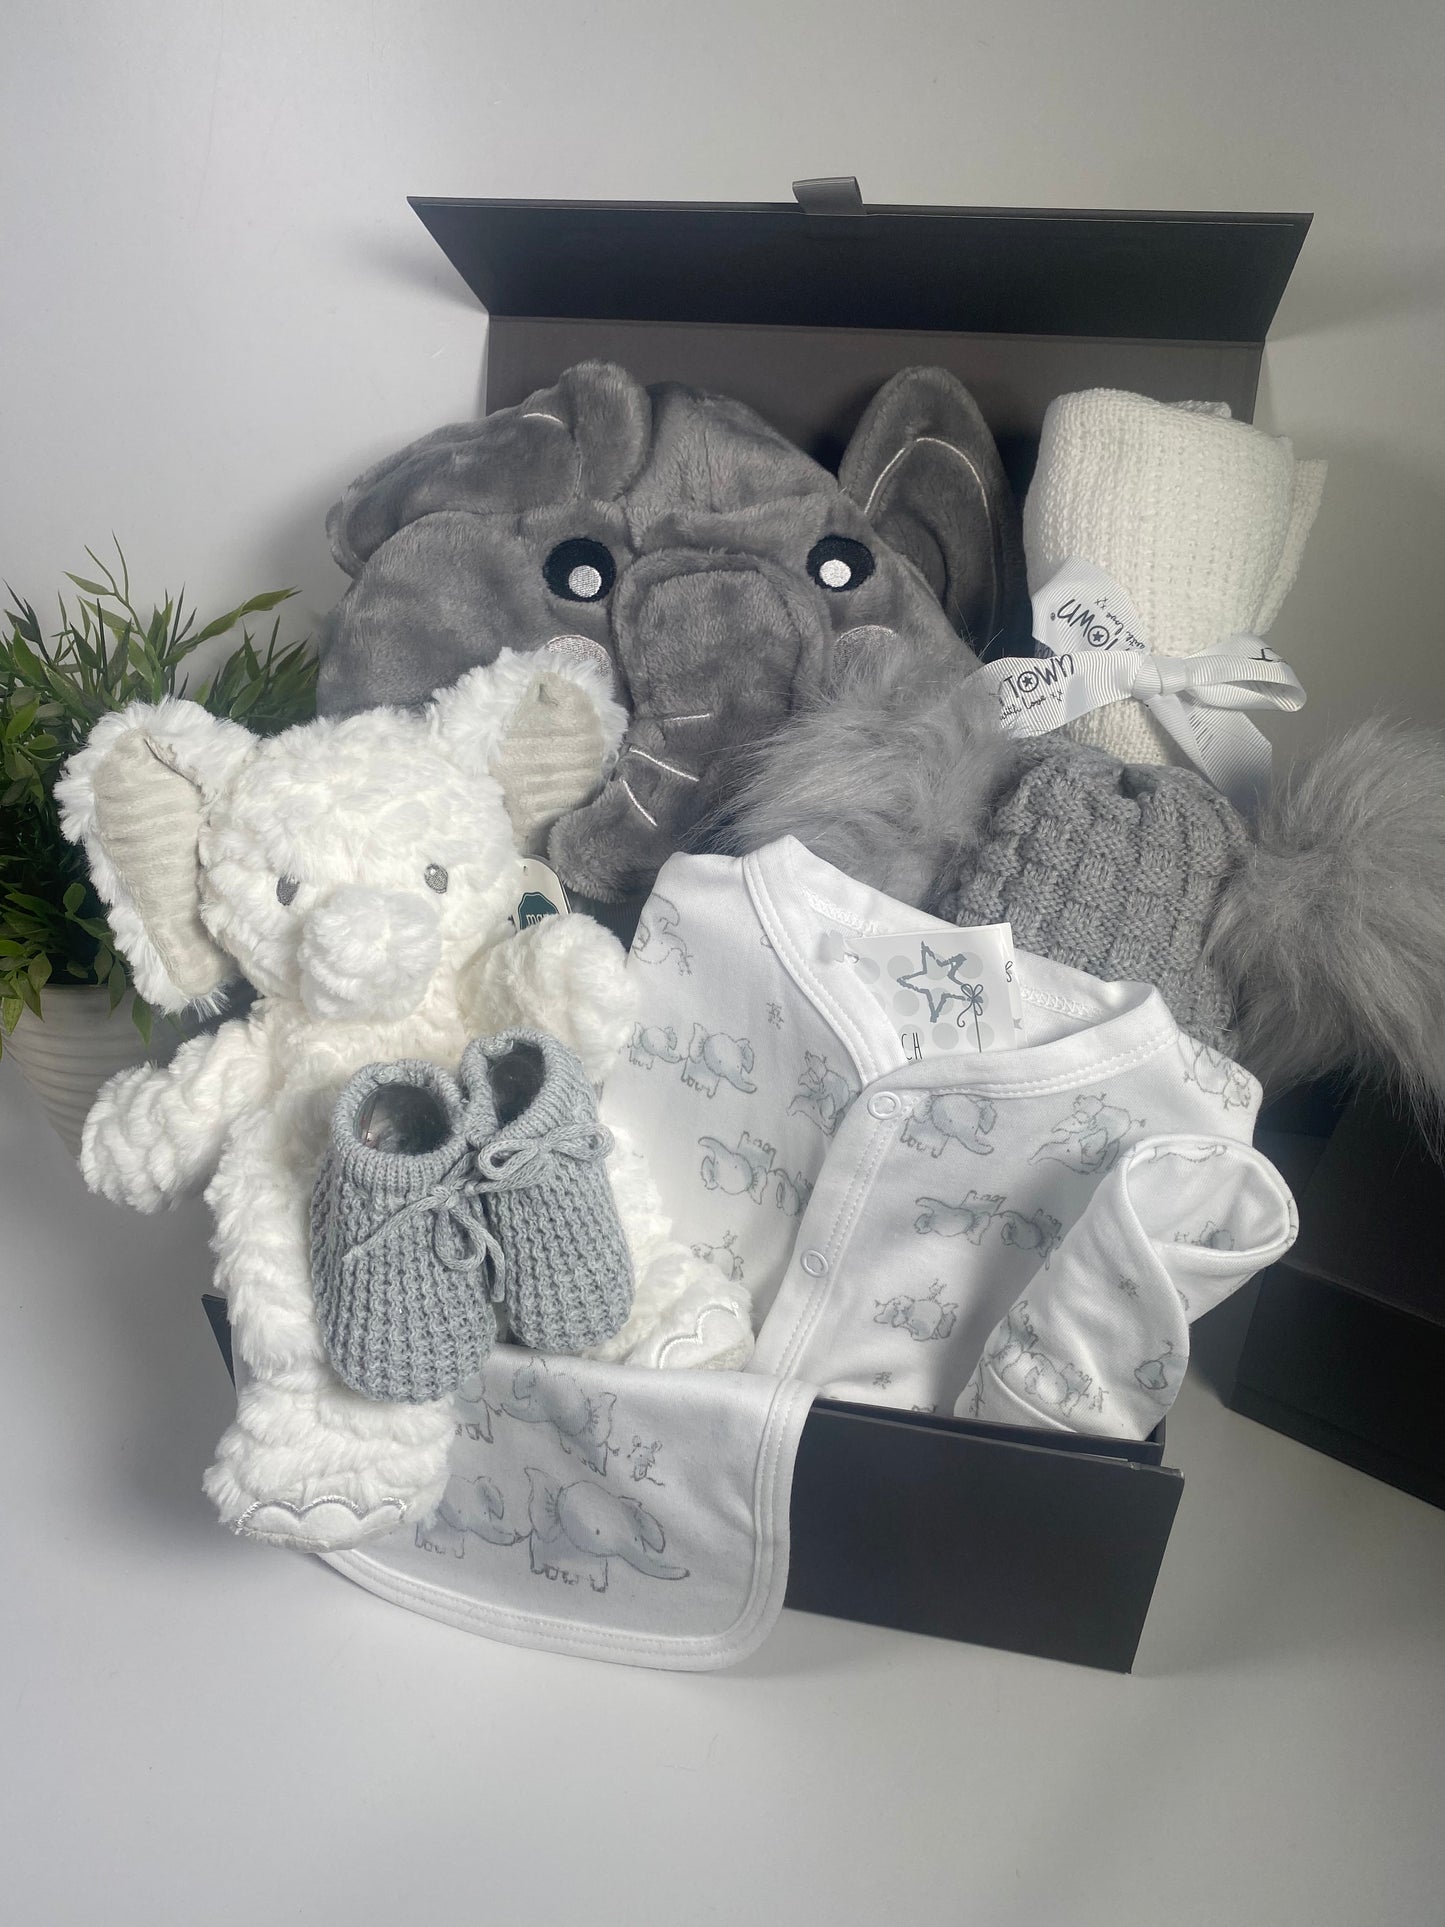 Elephany baby dressing gown, elepahnt baby toy in white, a white sleepsuit with grey elephant print and matching bib and hat,A grey baby dounle pompom hat , a pair pf grey baby booties and a white baby cotton cellular blanket in a baby hamper keepsake box.